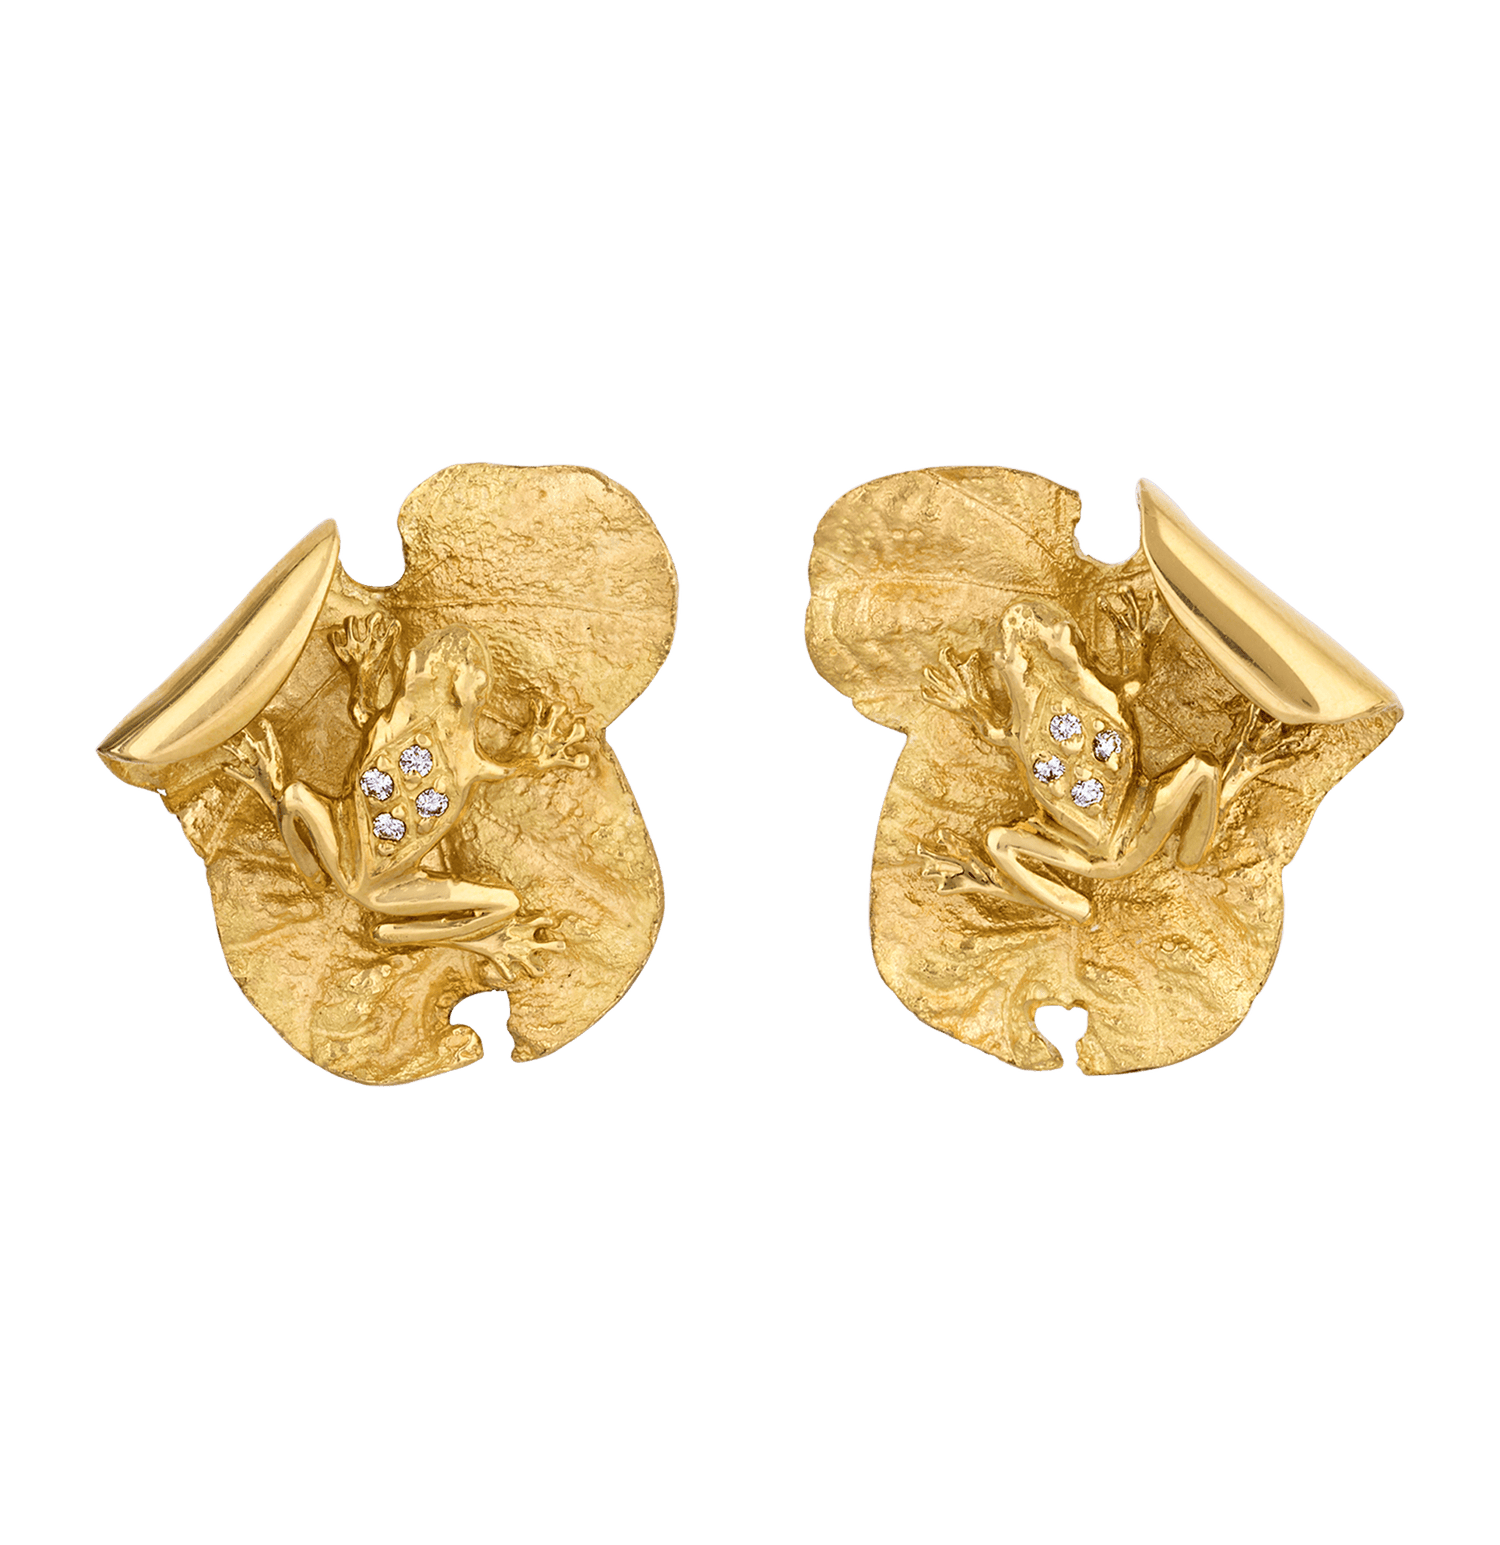 Frog and Lily Pad Gold and Diamond Earrings